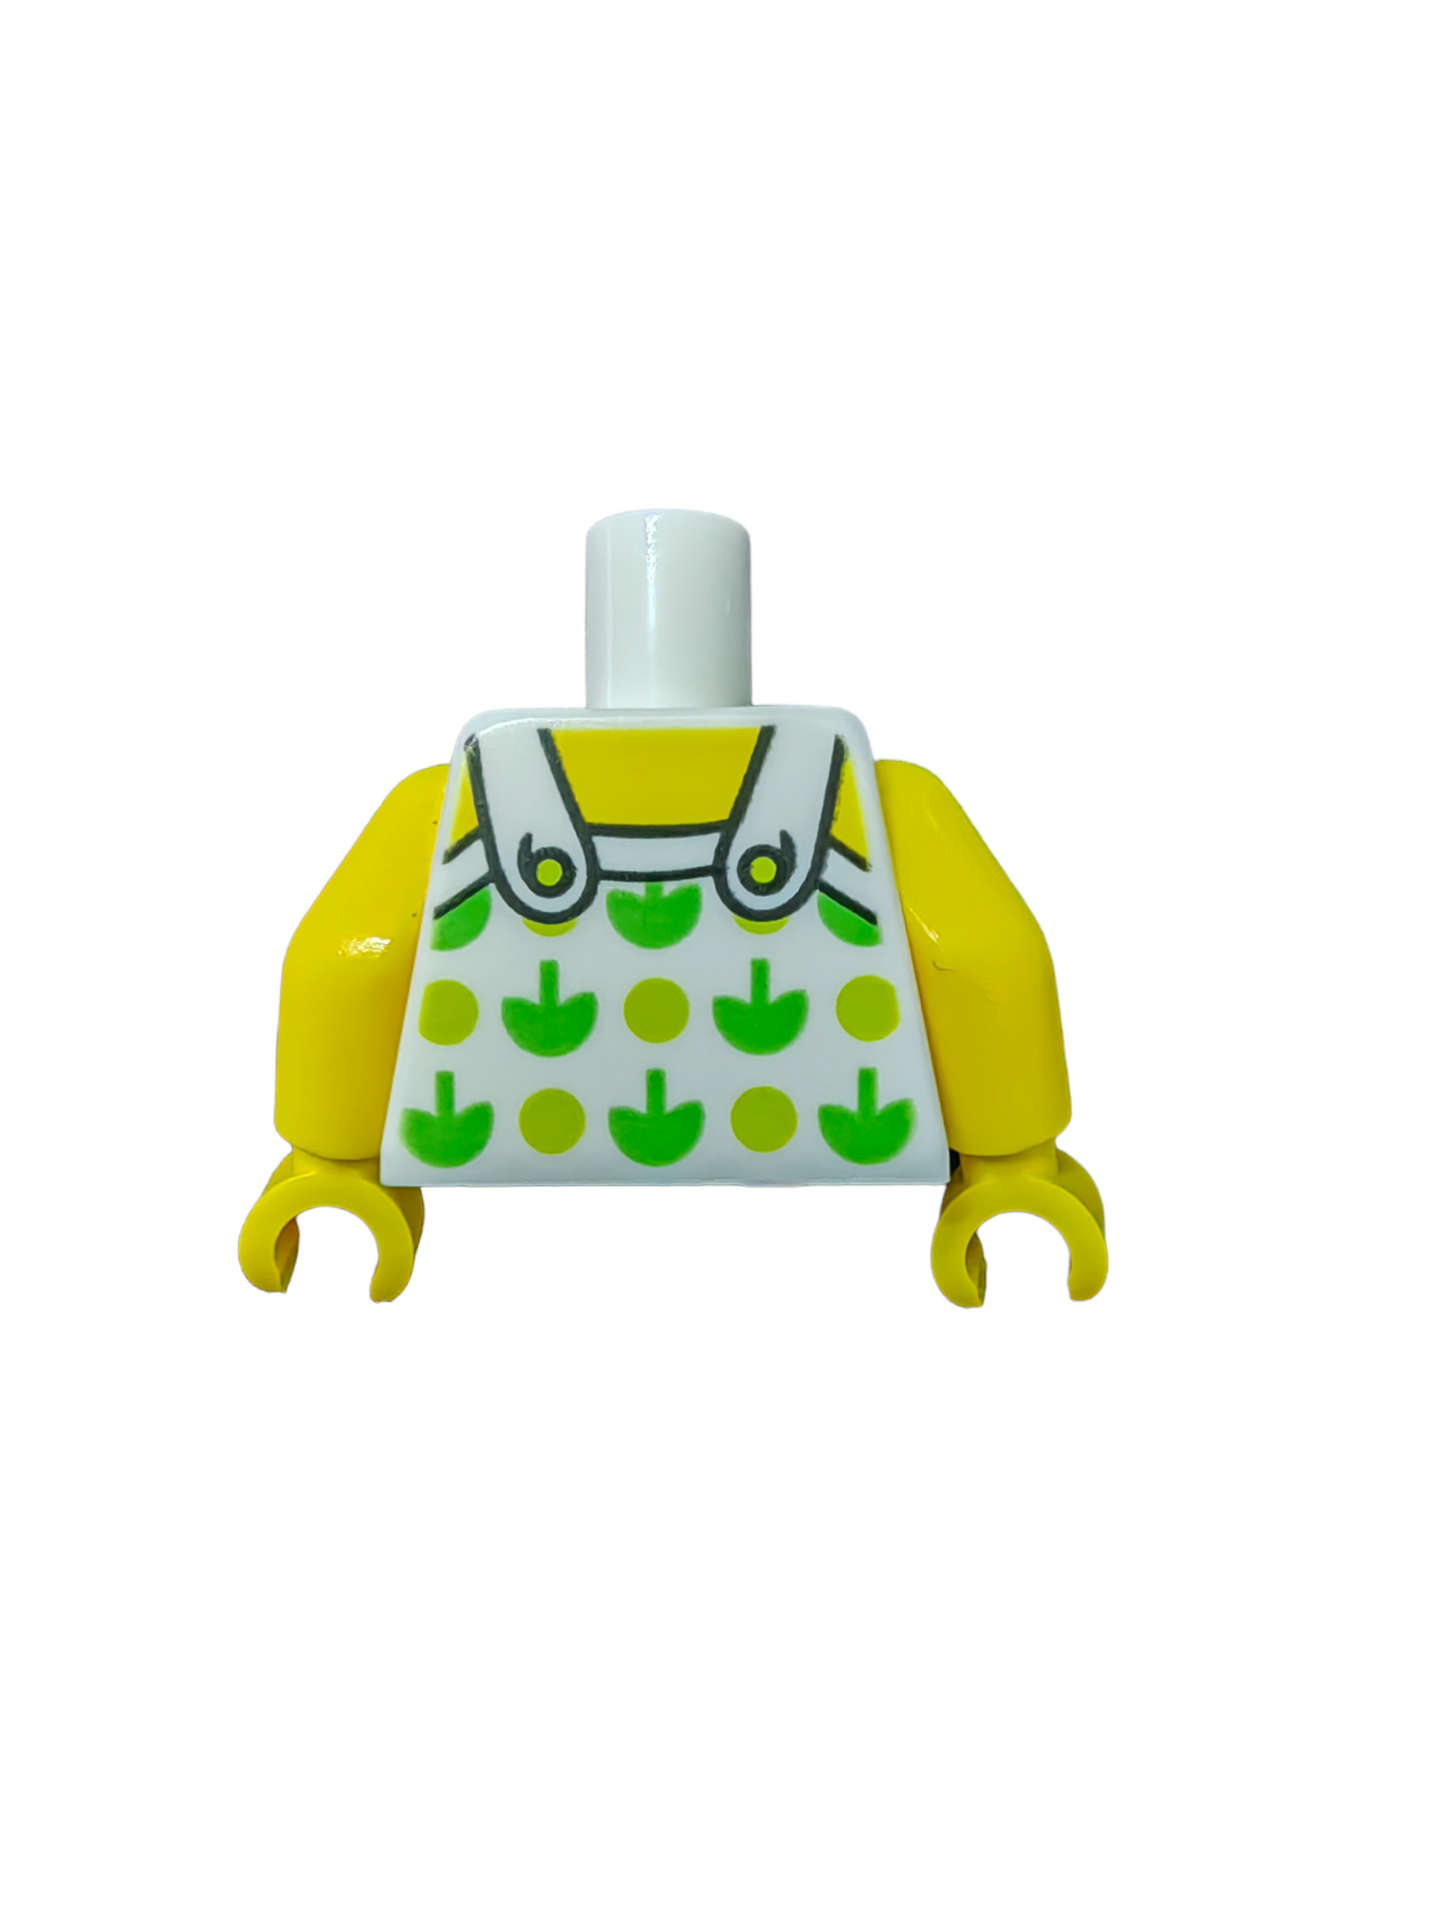 LEGO Torso, Top with Green Apples and Lime Spots - UB1121